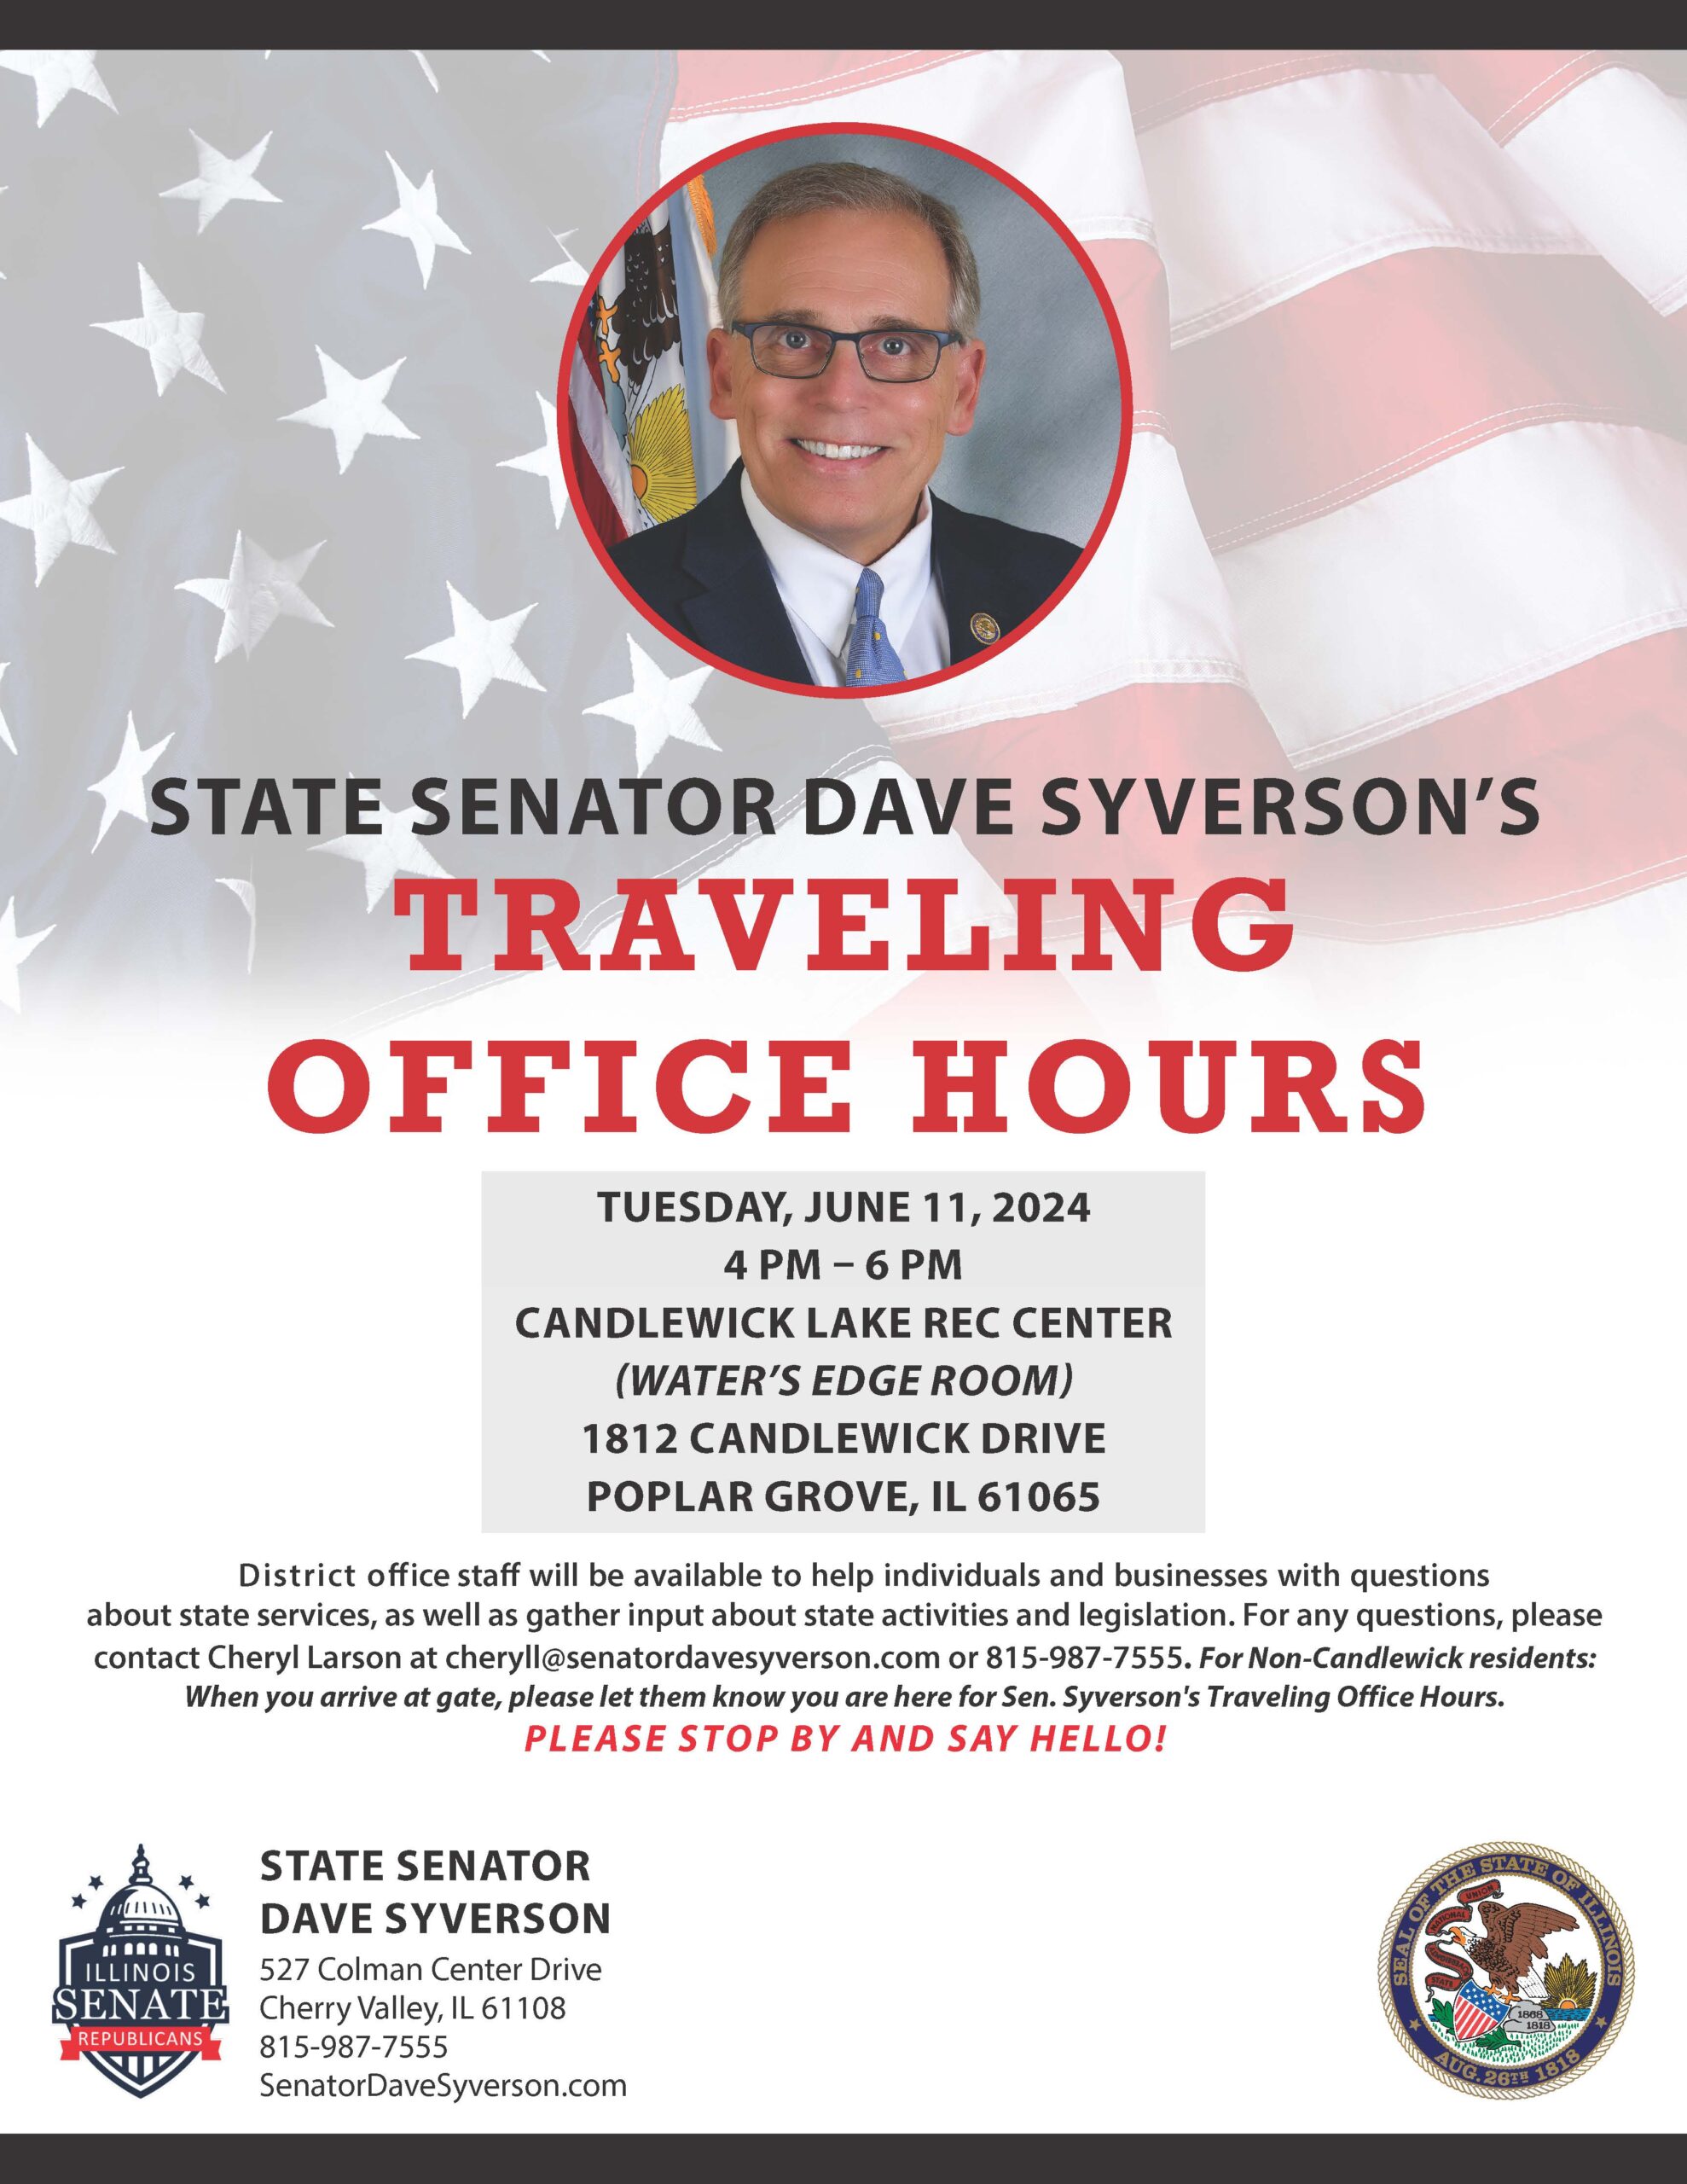 Senator Dave Syverson schedules Traveling Office Hours on June 11 at Candlewick Lake Rec Center in Poplar Grove